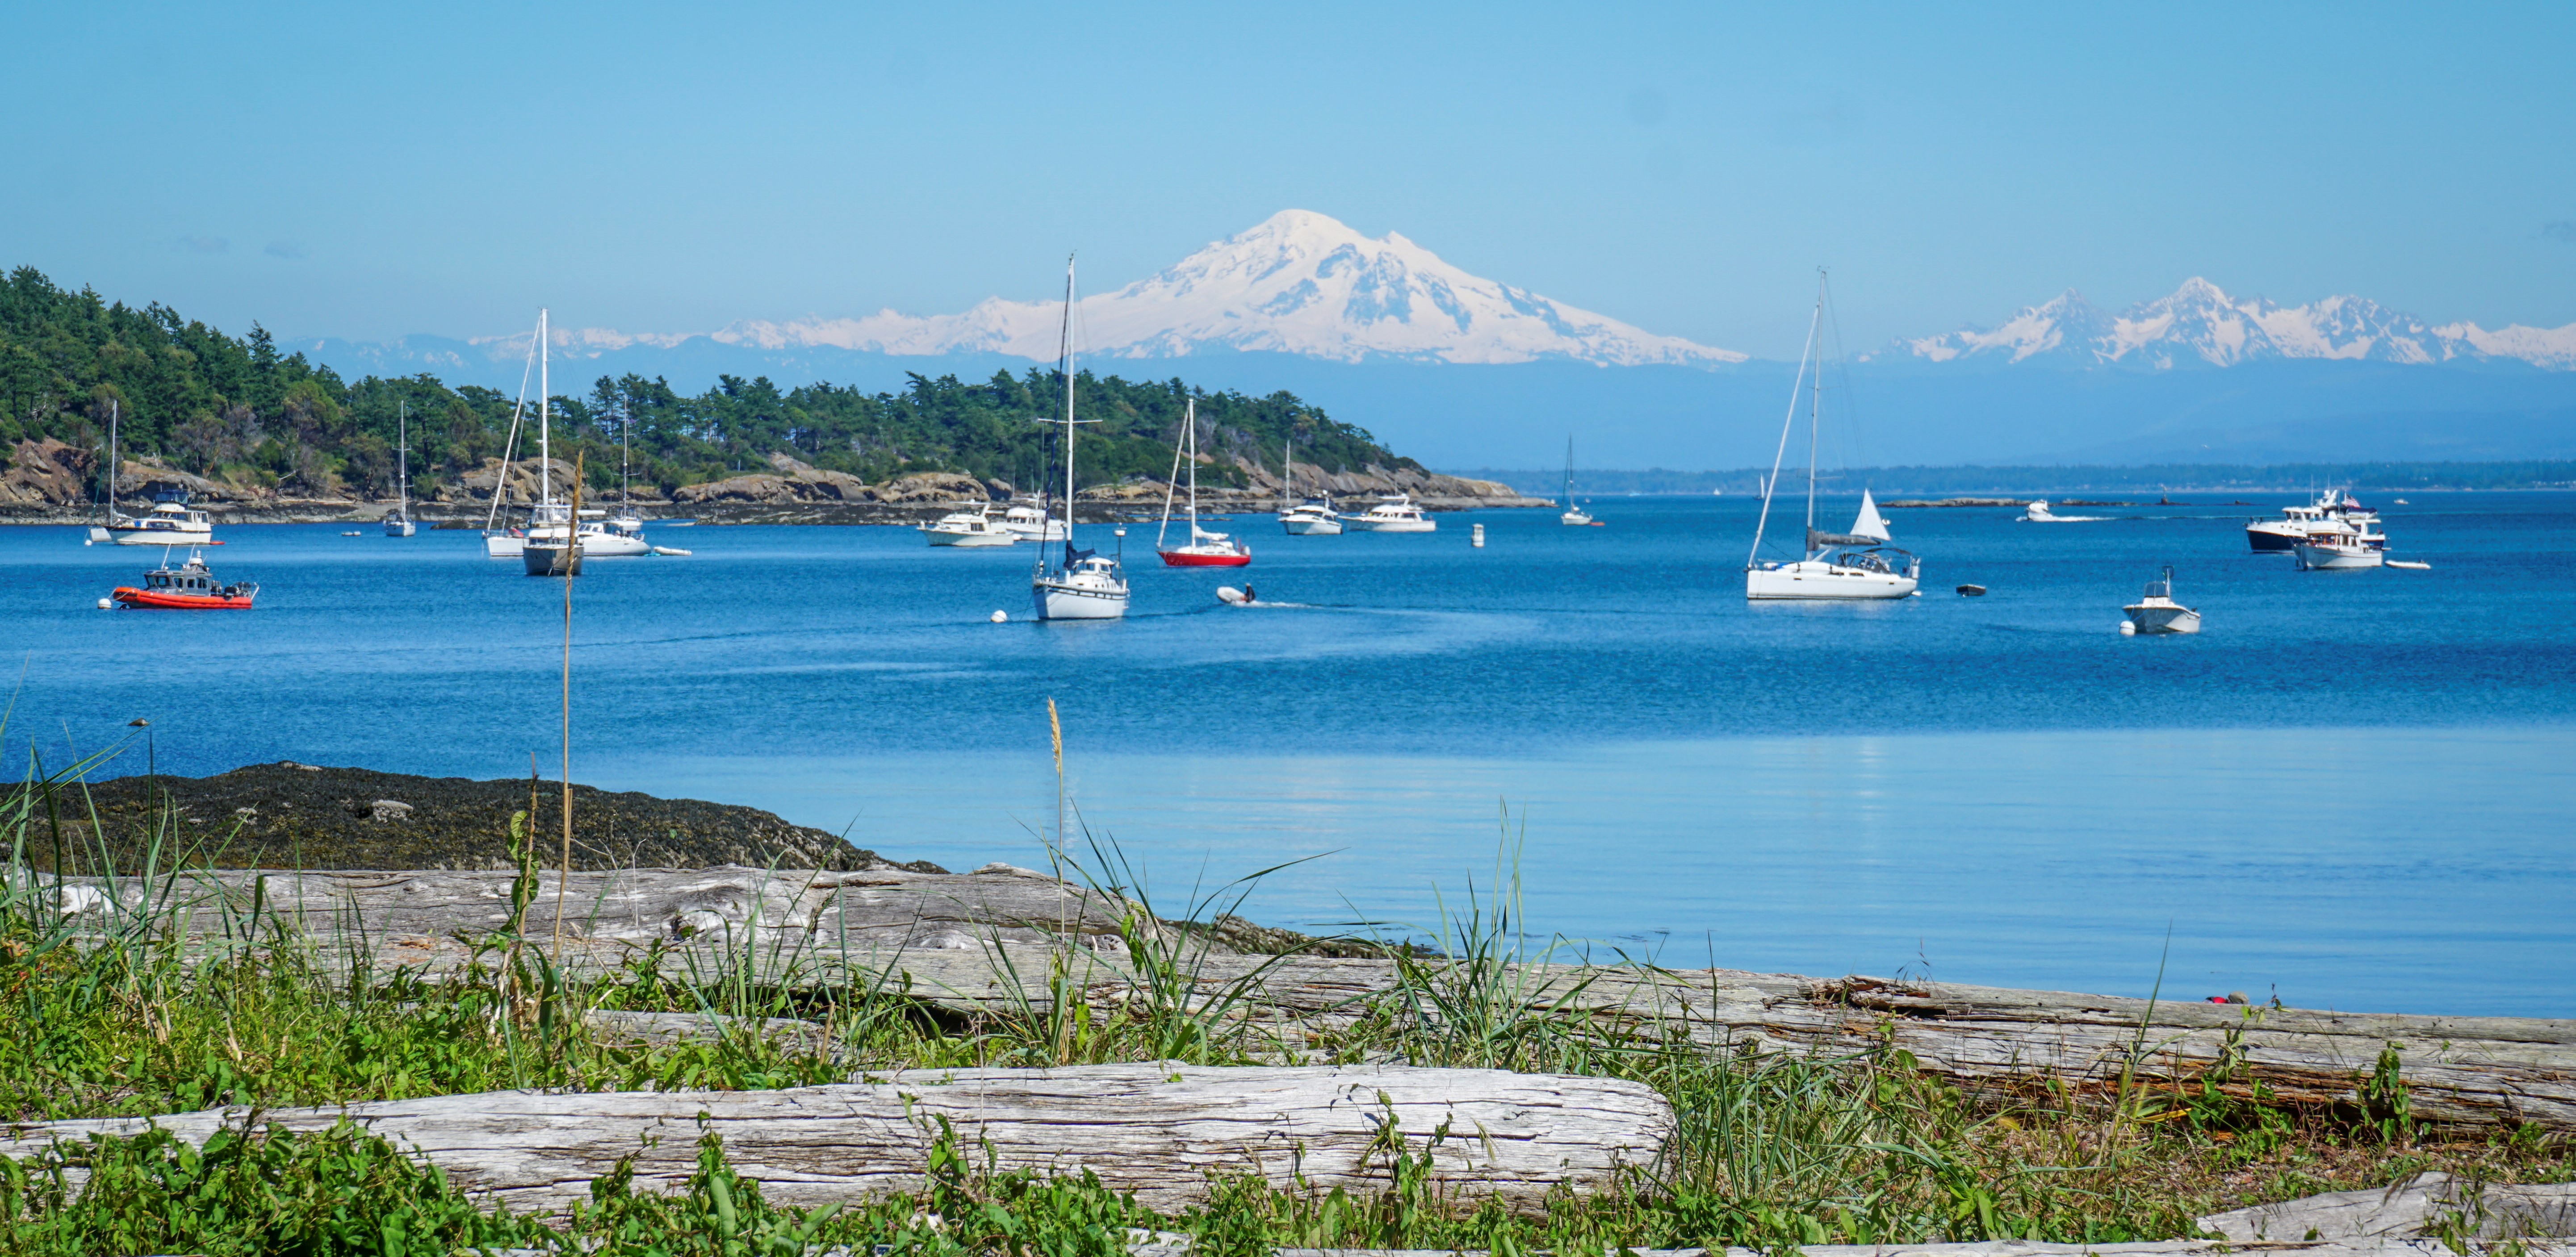 Boats in the San Juan Islands with Mount Baker in the background